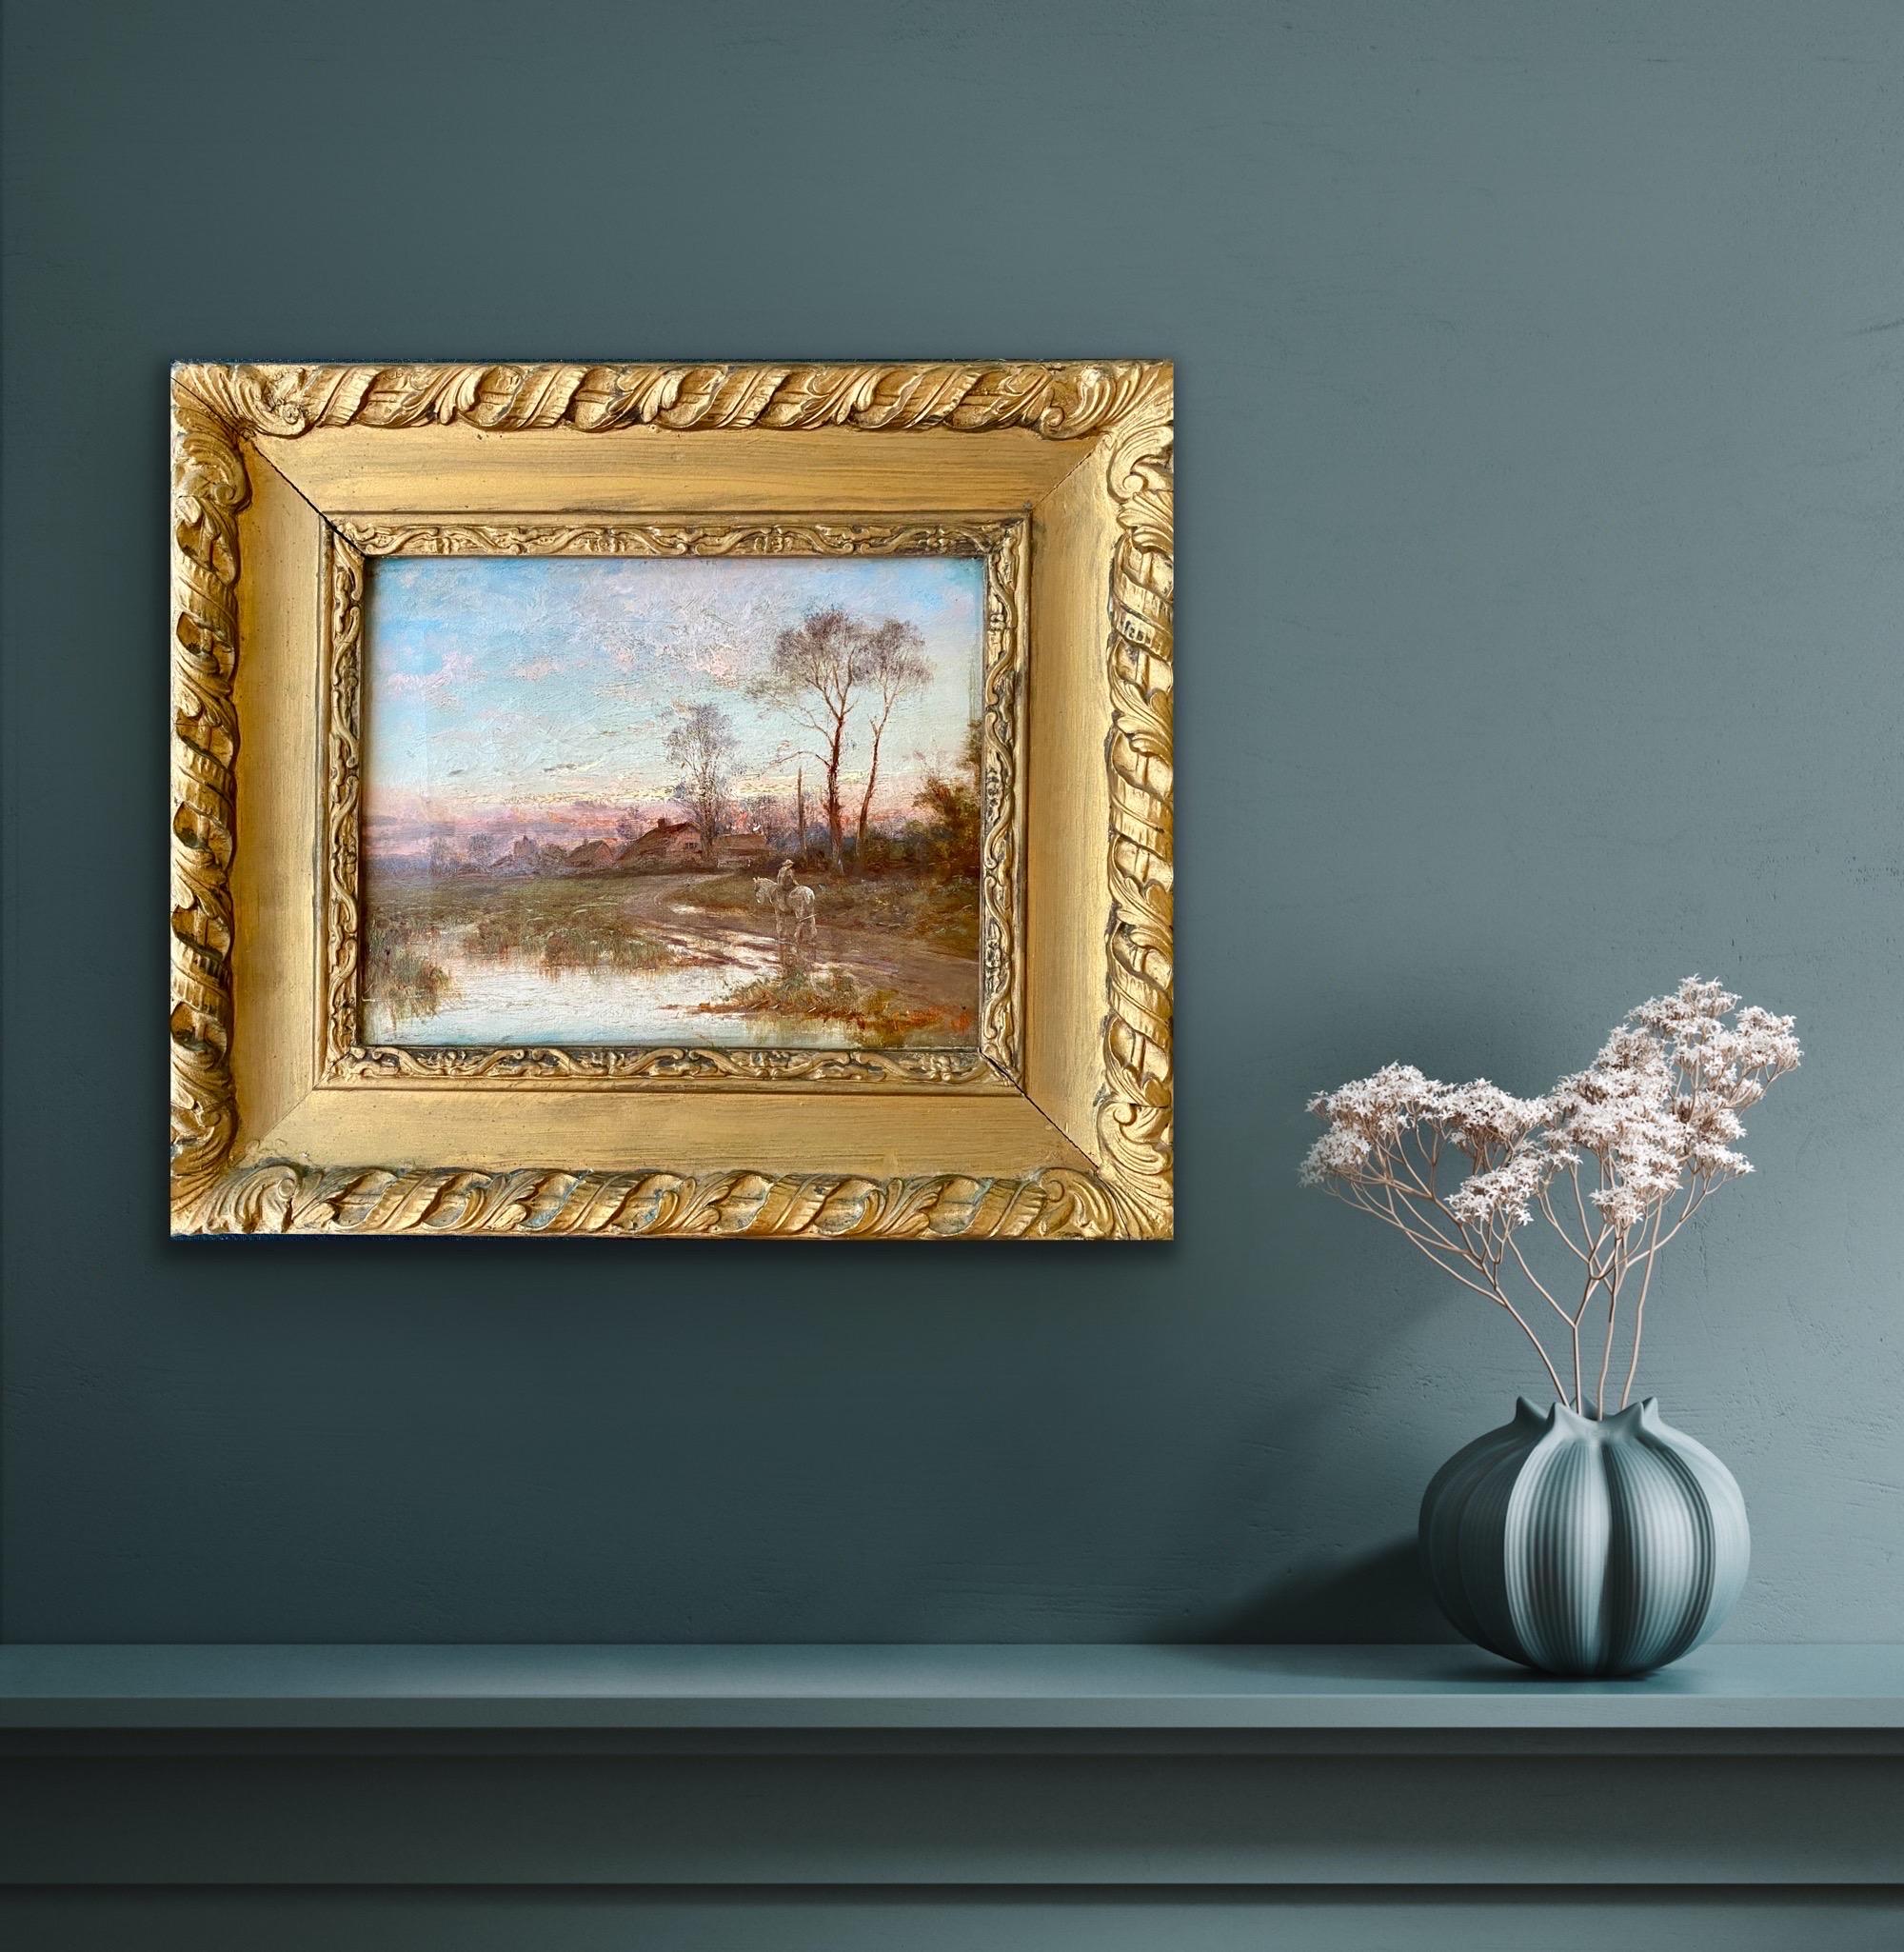 19th century English countryside landscape painting at sunset

This peaceful painting depicts an English countryside scenery during the early evening. In the foreground a man can be seen riding on his horse, returning home for the evening. The